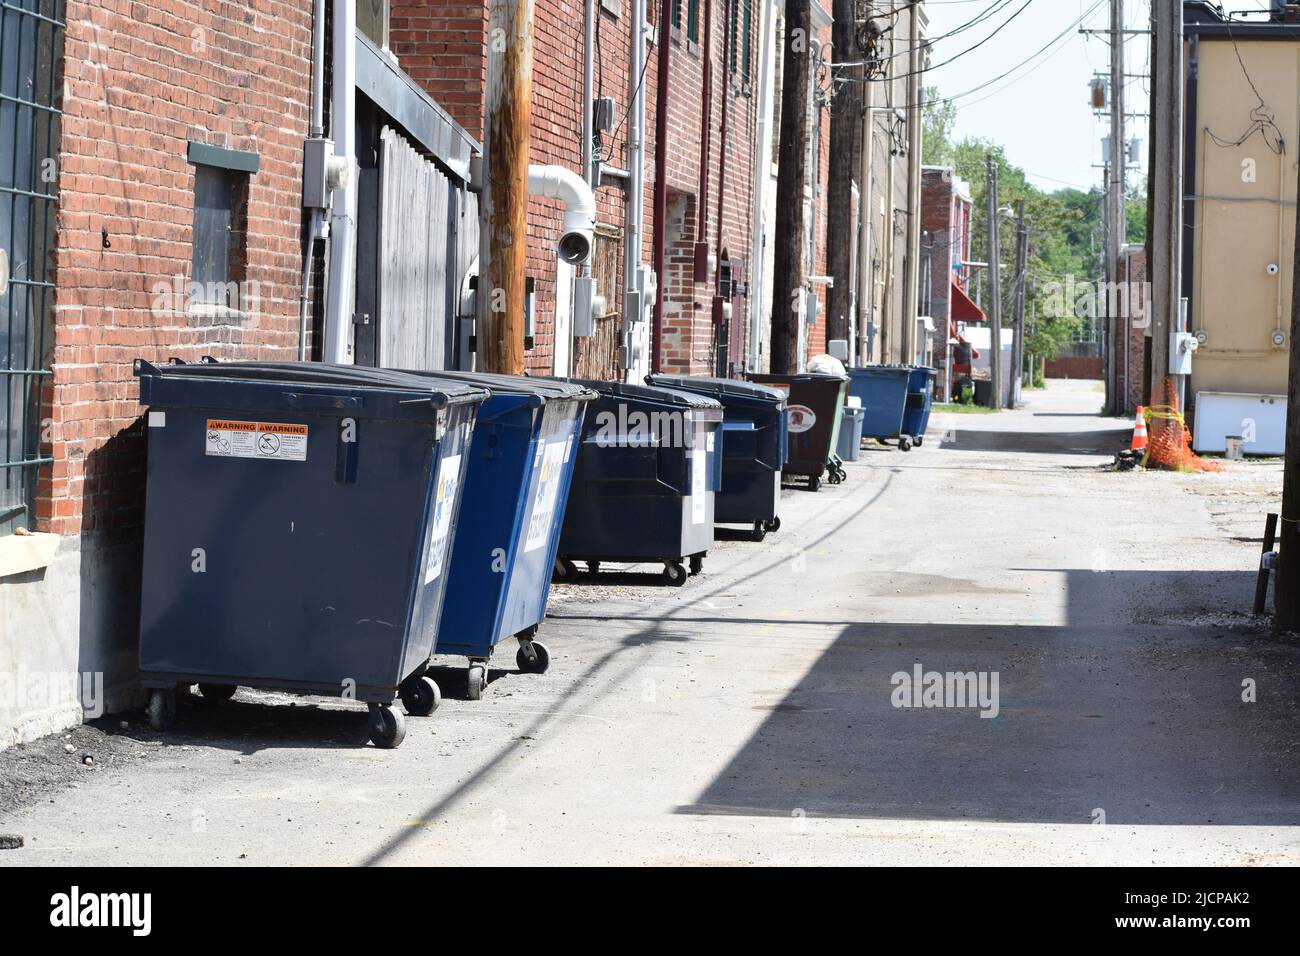 Trash dumpsters in an alley in Hannibal Missouri Stock Photo